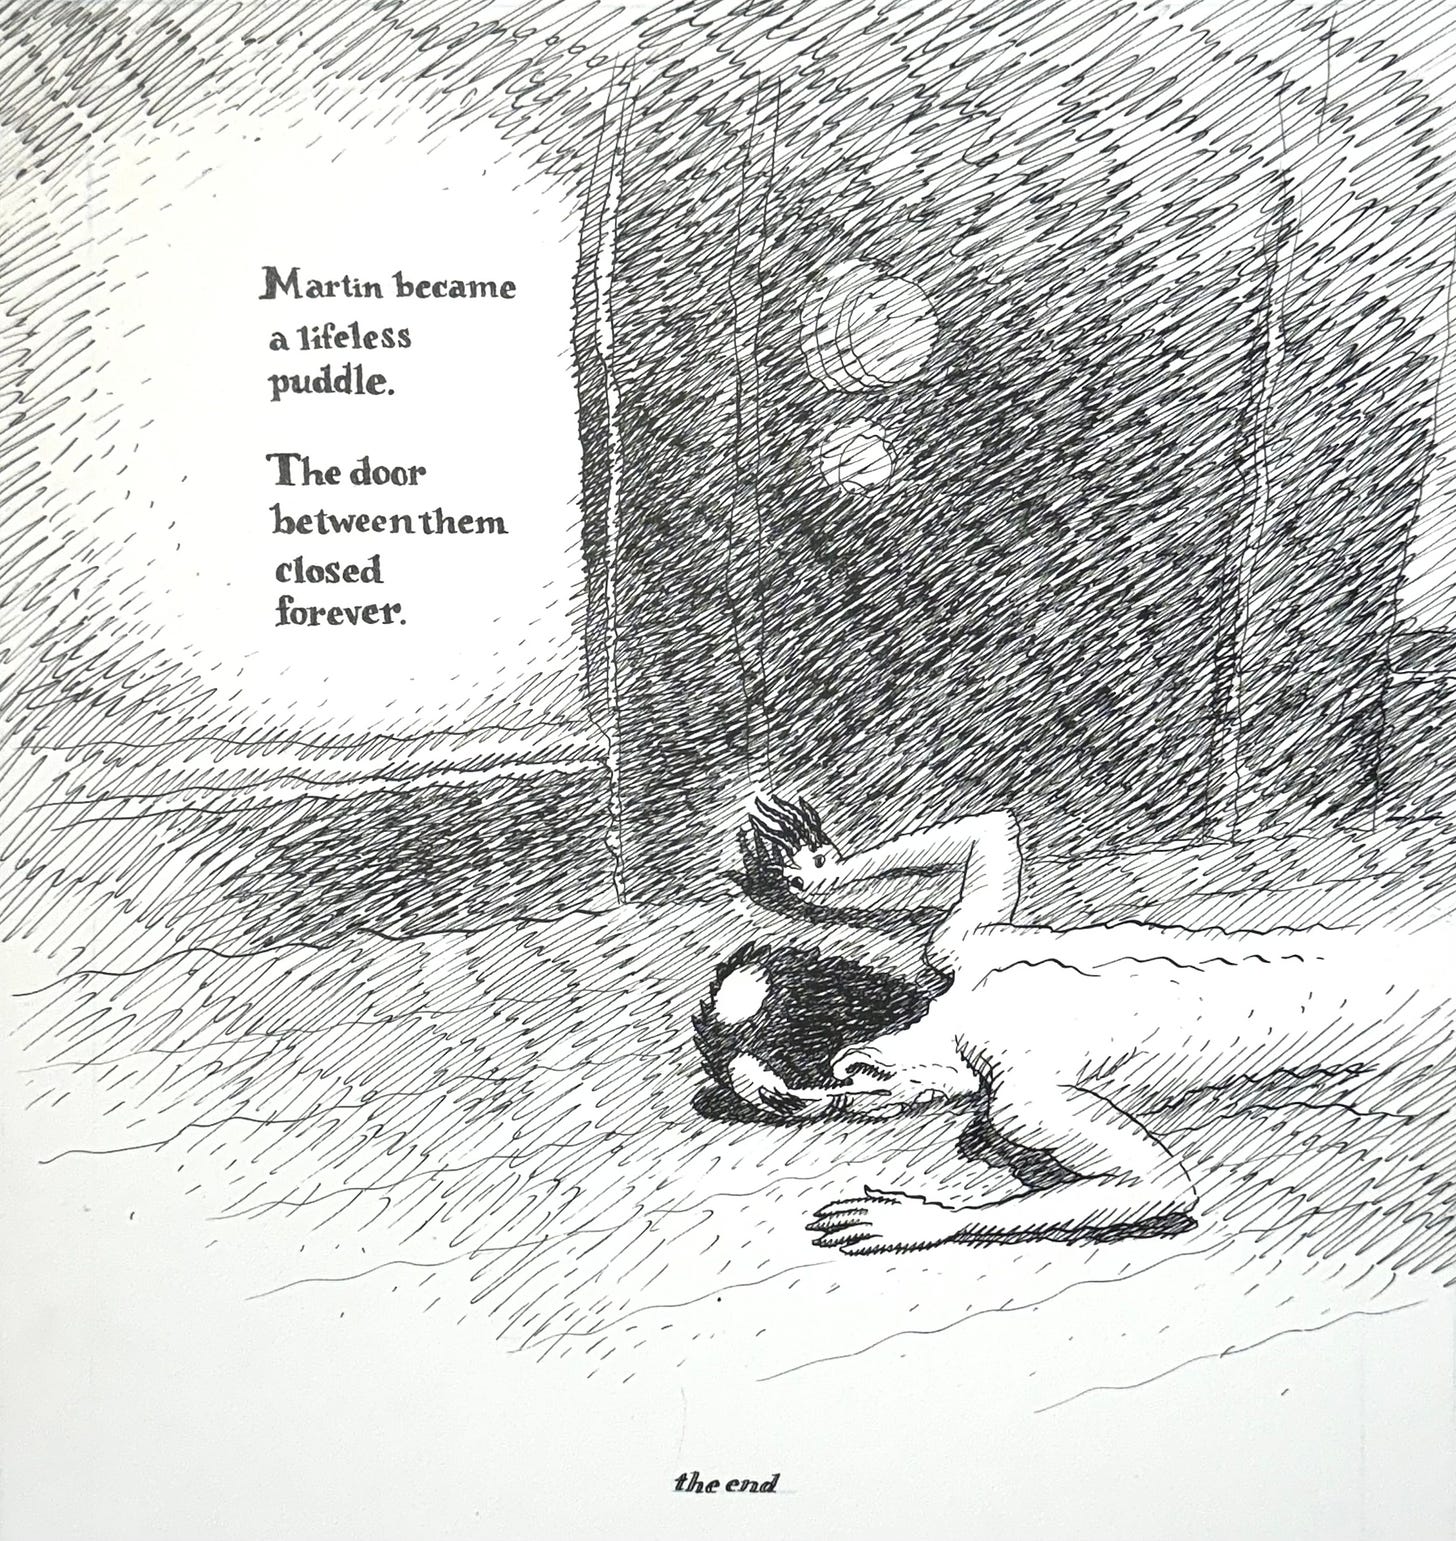 The original art from the final page of Ripple by Dave Cooper. A finely rendered man lays face down on the floor in front of a scratchily-inked closed door. The text reads: Martin became a lifeless puddle. The door between them closed forever.